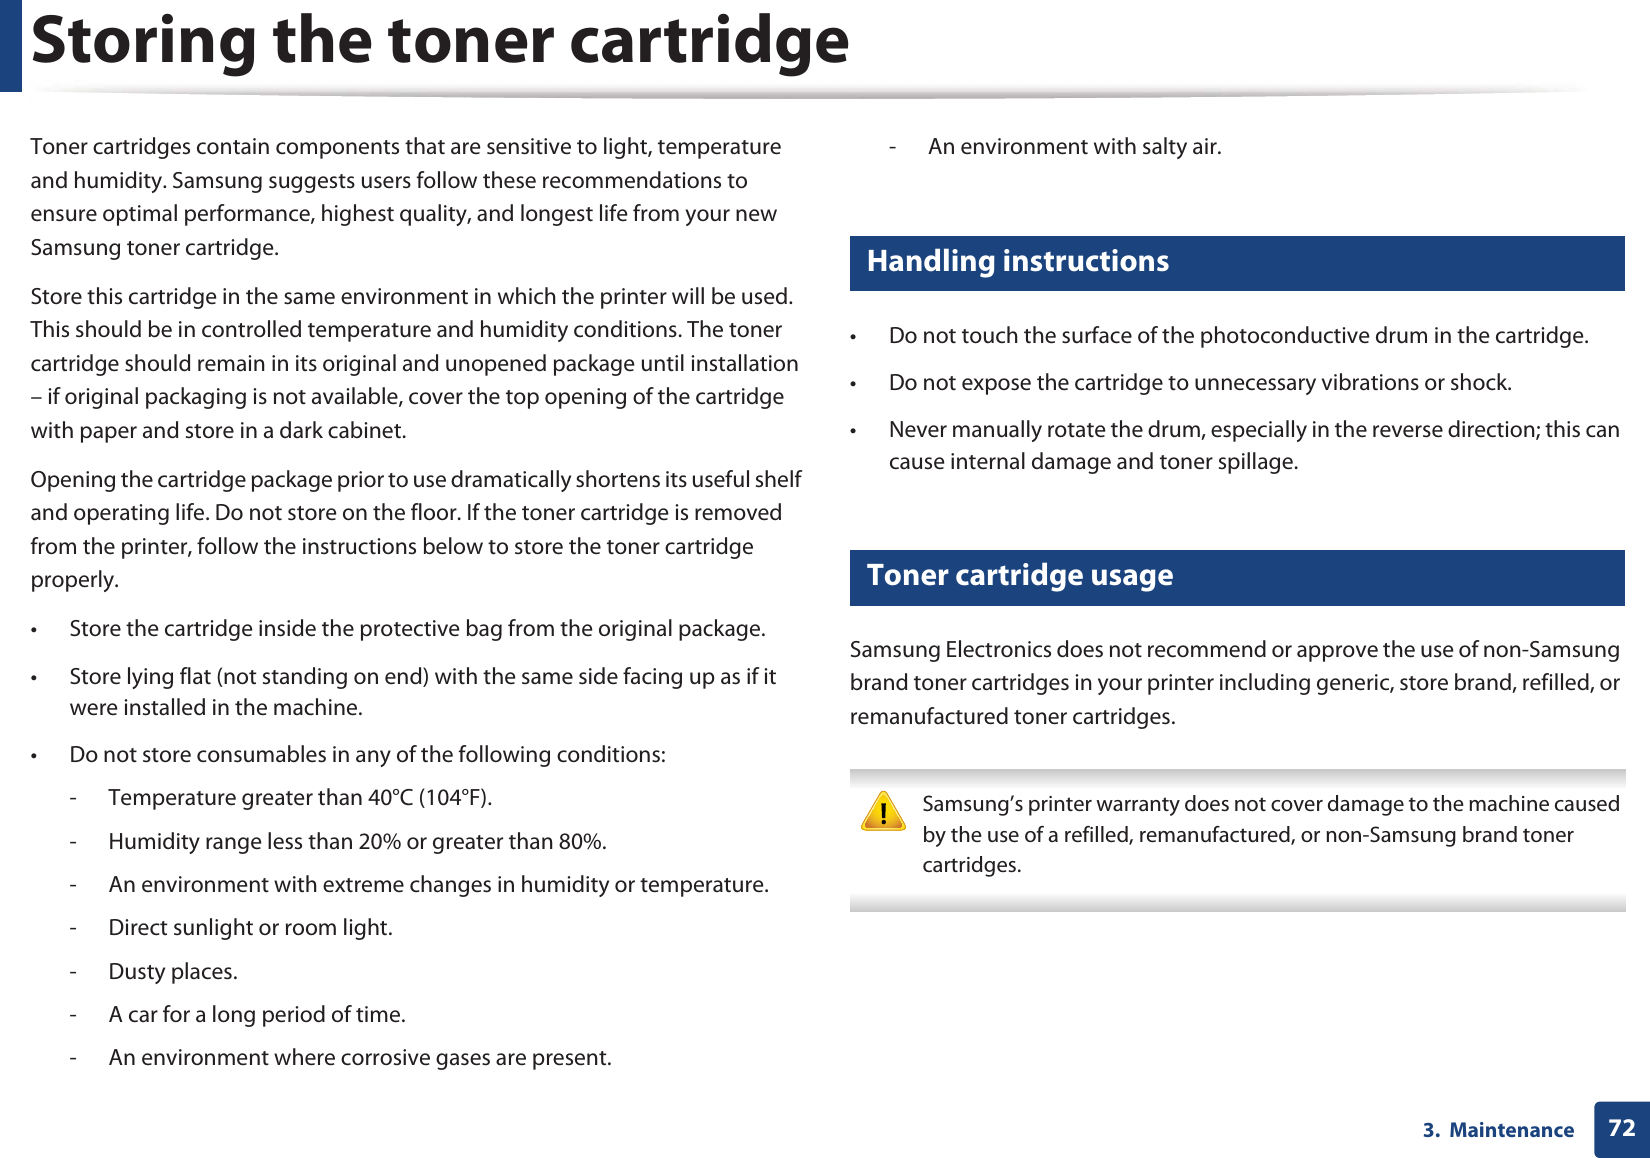 723.  MaintenanceStoring the toner cartridgeToner cartridges contain components that are sensitive to light, temperature and humidity. Samsung suggests users follow these recommendations to ensure optimal performance, highest quality, and longest life from your new Samsung toner cartridge.Store this cartridge in the same environment in which the printer will be used. This should be in controlled temperature and humidity conditions. The toner cartridge should remain in its original and unopened package until installation – if original packaging is not available, cover the top opening of the cartridge with paper and store in a dark cabinet.Opening the cartridge package prior to use dramatically shortens its useful shelf and operating life. Do not store on the floor. If the toner cartridge is removed from the printer, follow the instructions below to store the toner cartridge properly.• Store the cartridge inside the protective bag from the original package. • Store lying flat (not standing on end) with the same side facing up as if it were installed in the machine.• Do not store consumables in any of the following conditions:- Temperature greater than 40°C (104°F).- Humidity range less than 20% or greater than 80%.- An environment with extreme changes in humidity or temperature.- Direct sunlight or room light.- Dusty places.- A car for a long period of time.- An environment where corrosive gases are present.- An environment with salty air.1 Handling instructions• Do not touch the surface of the photoconductive drum in the cartridge.• Do not expose the cartridge to unnecessary vibrations or shock.• Never manually rotate the drum, especially in the reverse direction; this can cause internal damage and toner spillage.2 Toner cartridge usageSamsung Electronics does not recommend or approve the use of non-Samsung brand toner cartridges in your printer including generic, store brand, refilled, or remanufactured toner cartridges. Samsung’s printer warranty does not cover damage to the machine caused by the use of a refilled, remanufactured, or non-Samsung brand toner cartridges. 